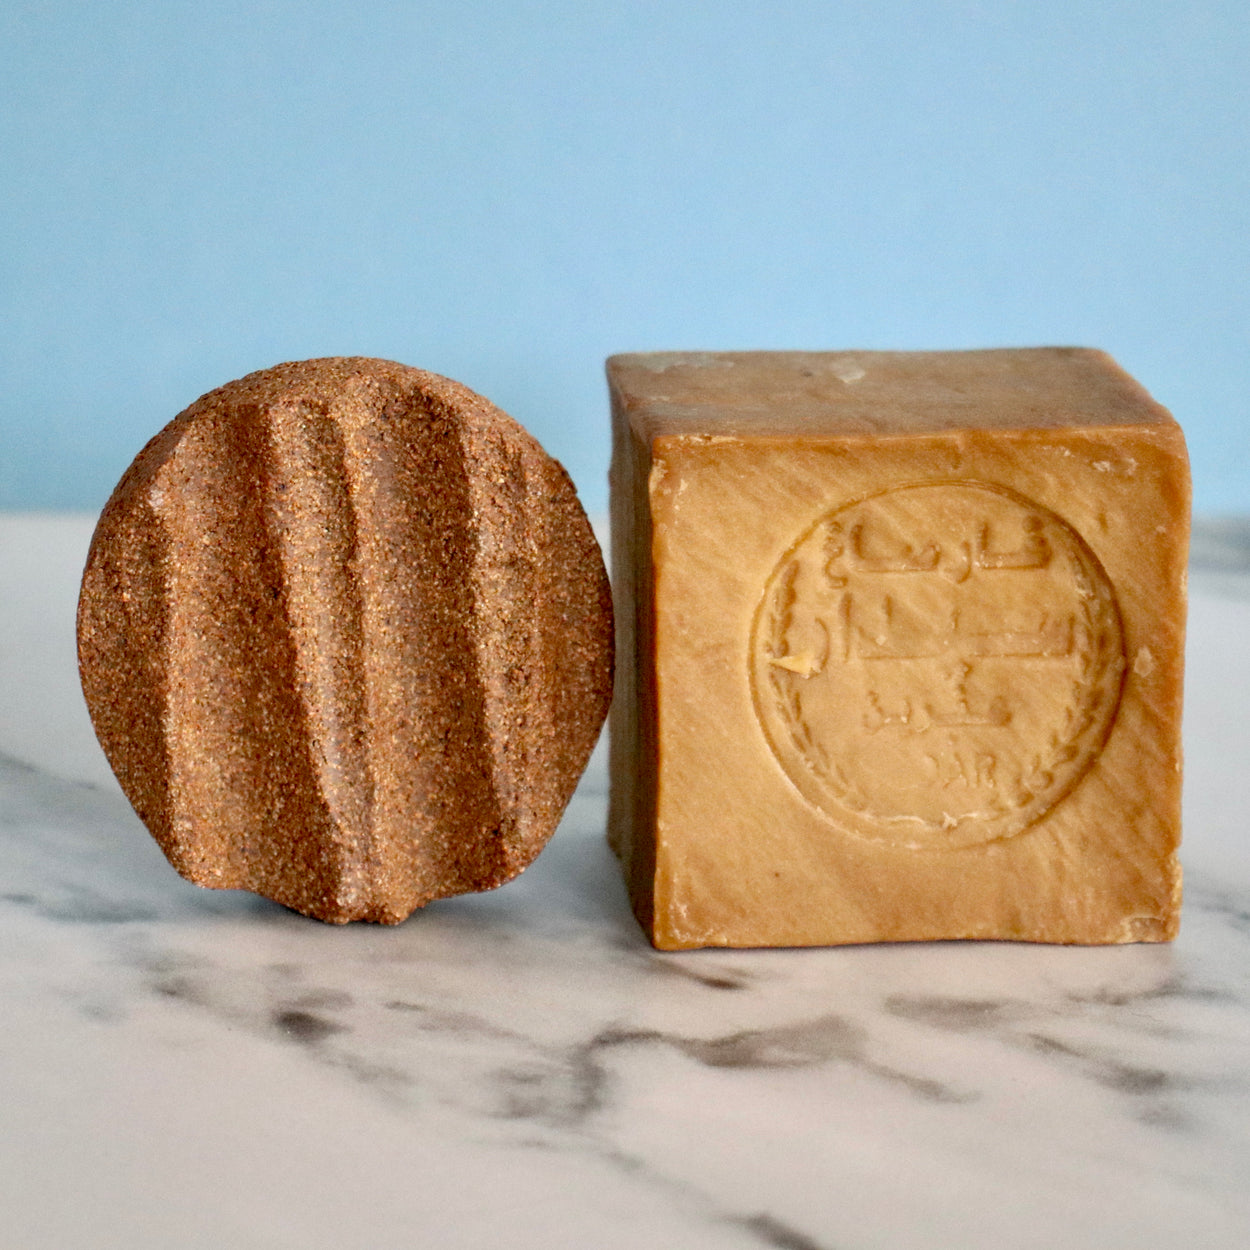 Alepp soap next to round Ceramic Soap Holder by Grace McCarthy